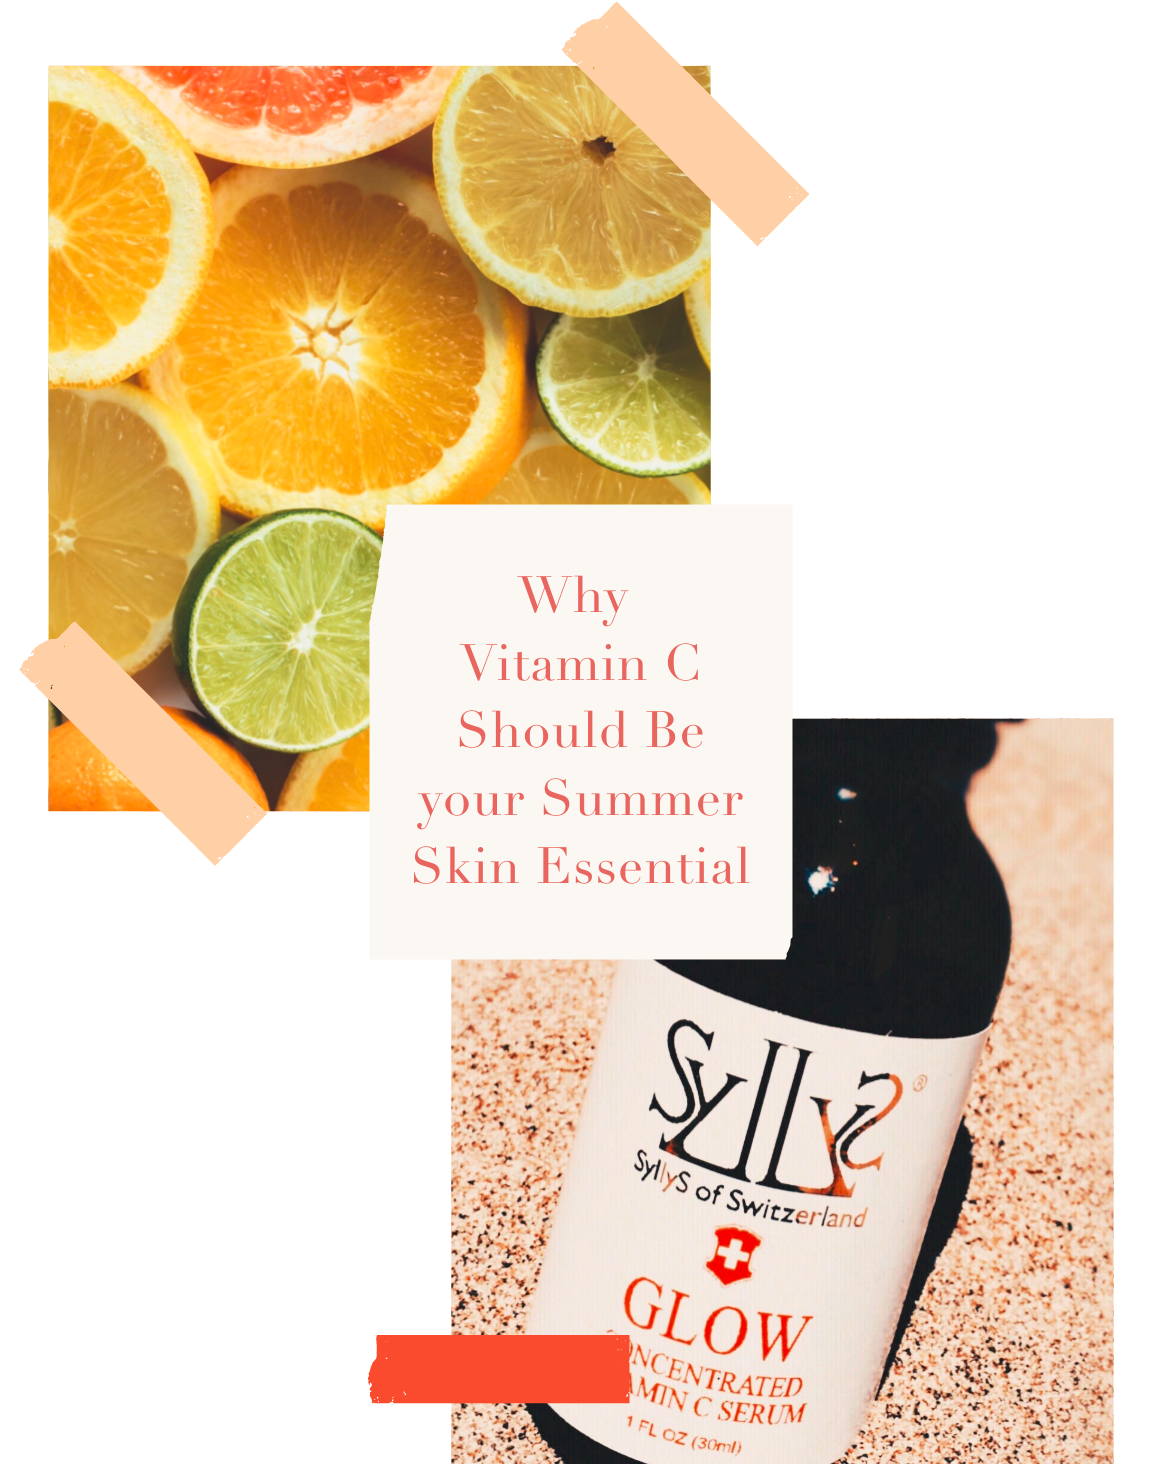 1 image Oranges Slices with an image SyllyS Glow Serum Glass Bottle in sand with blaring sun  below it. Images are separated with Red text on Cream background Stating "Why Vitamin C Should Be Your Summer Skin Essential"